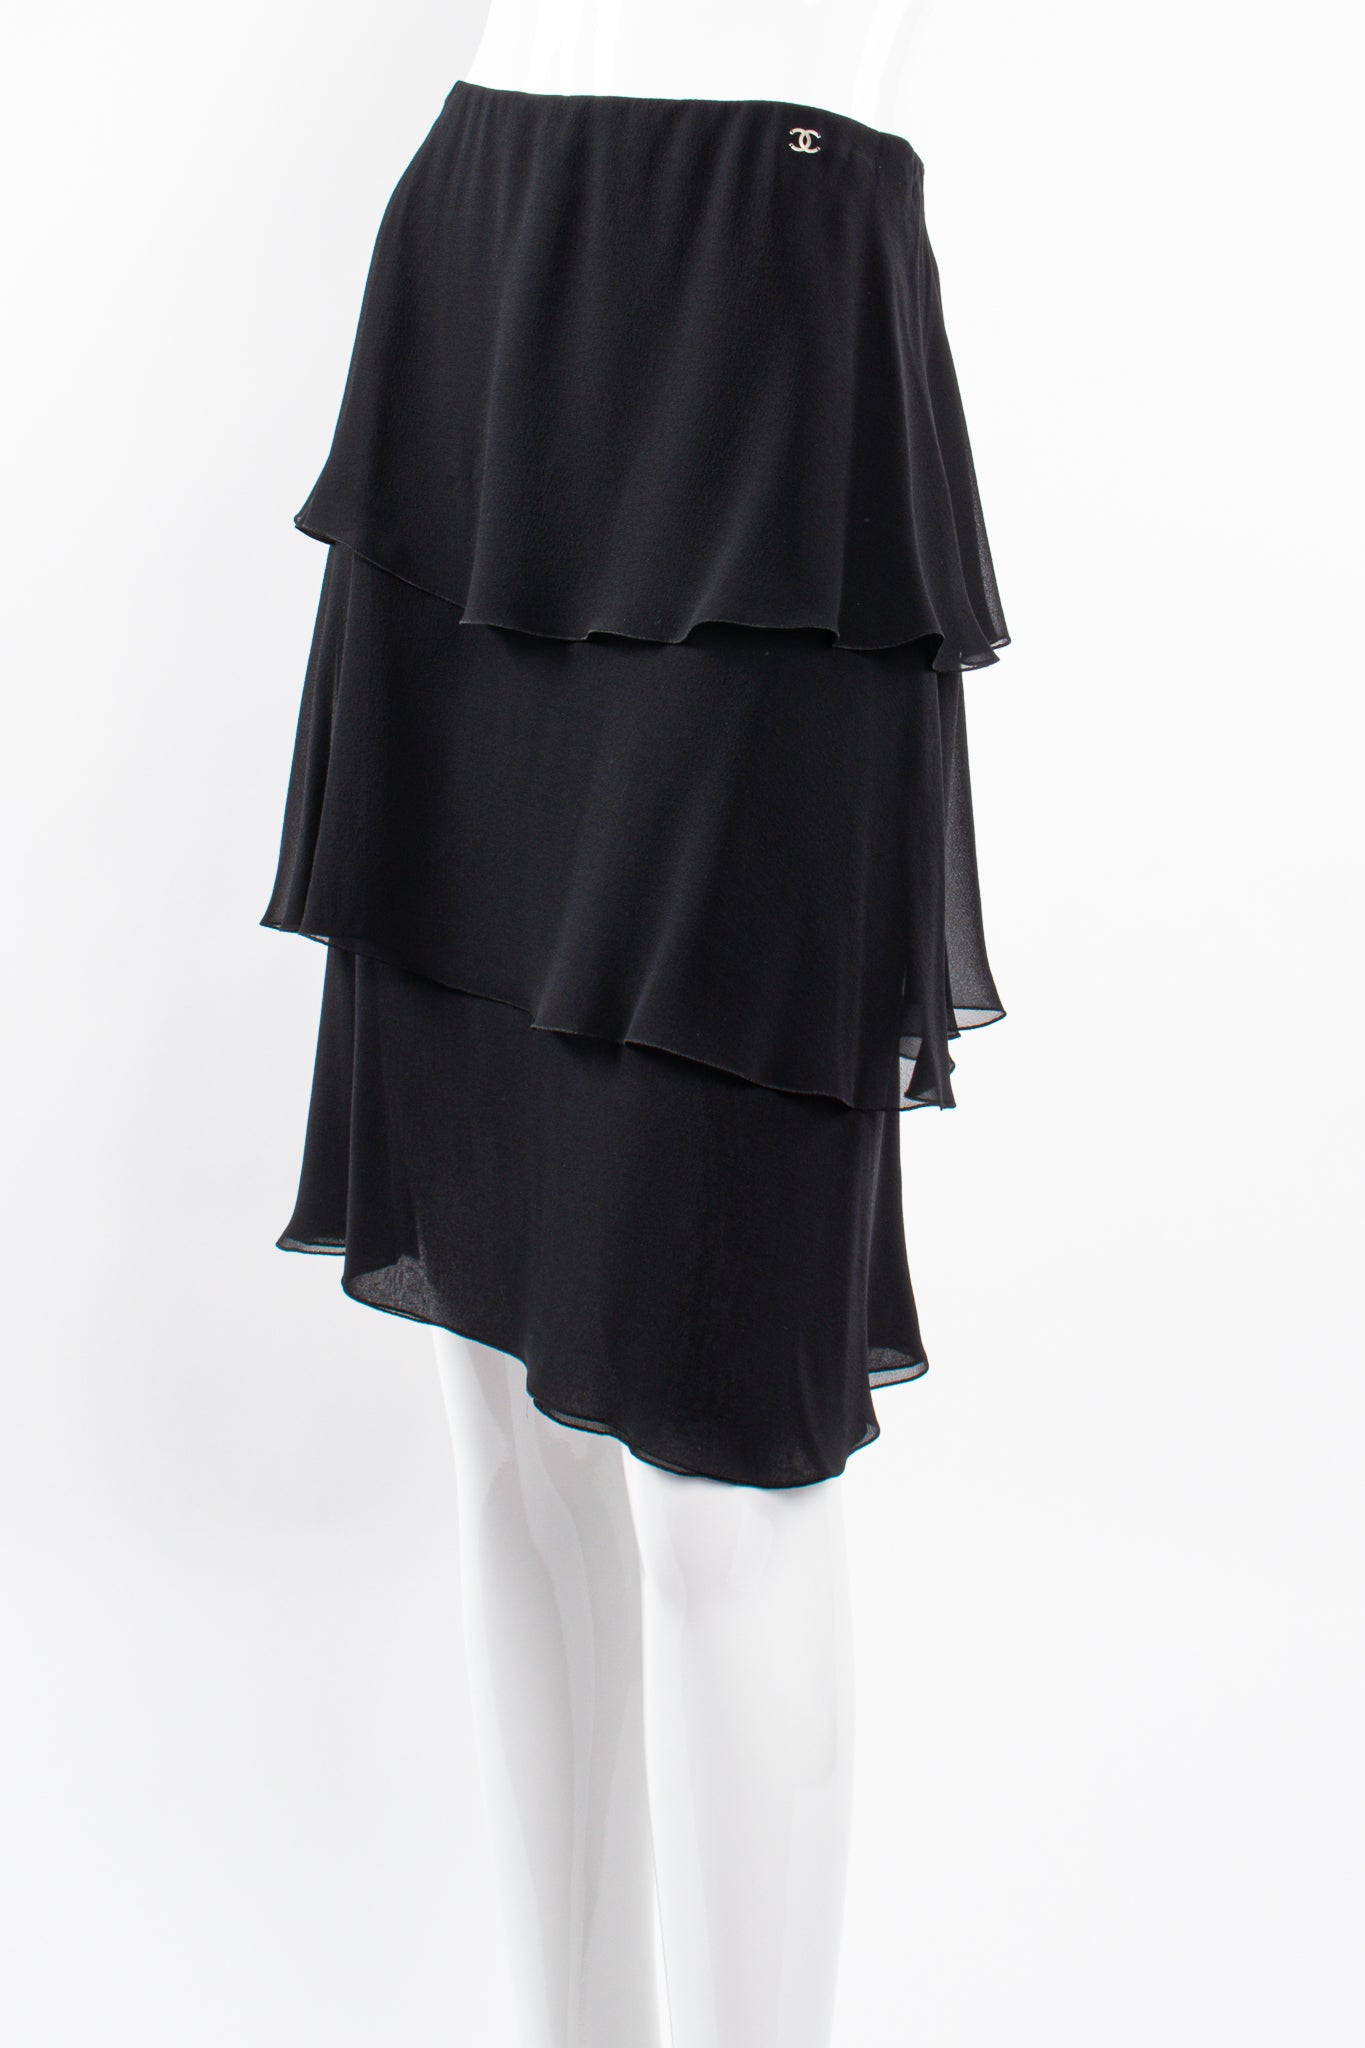 Vintage Chanel Chiffon Tiered Flounce Skirt on Mannequin front angle at Recess Los Angeles